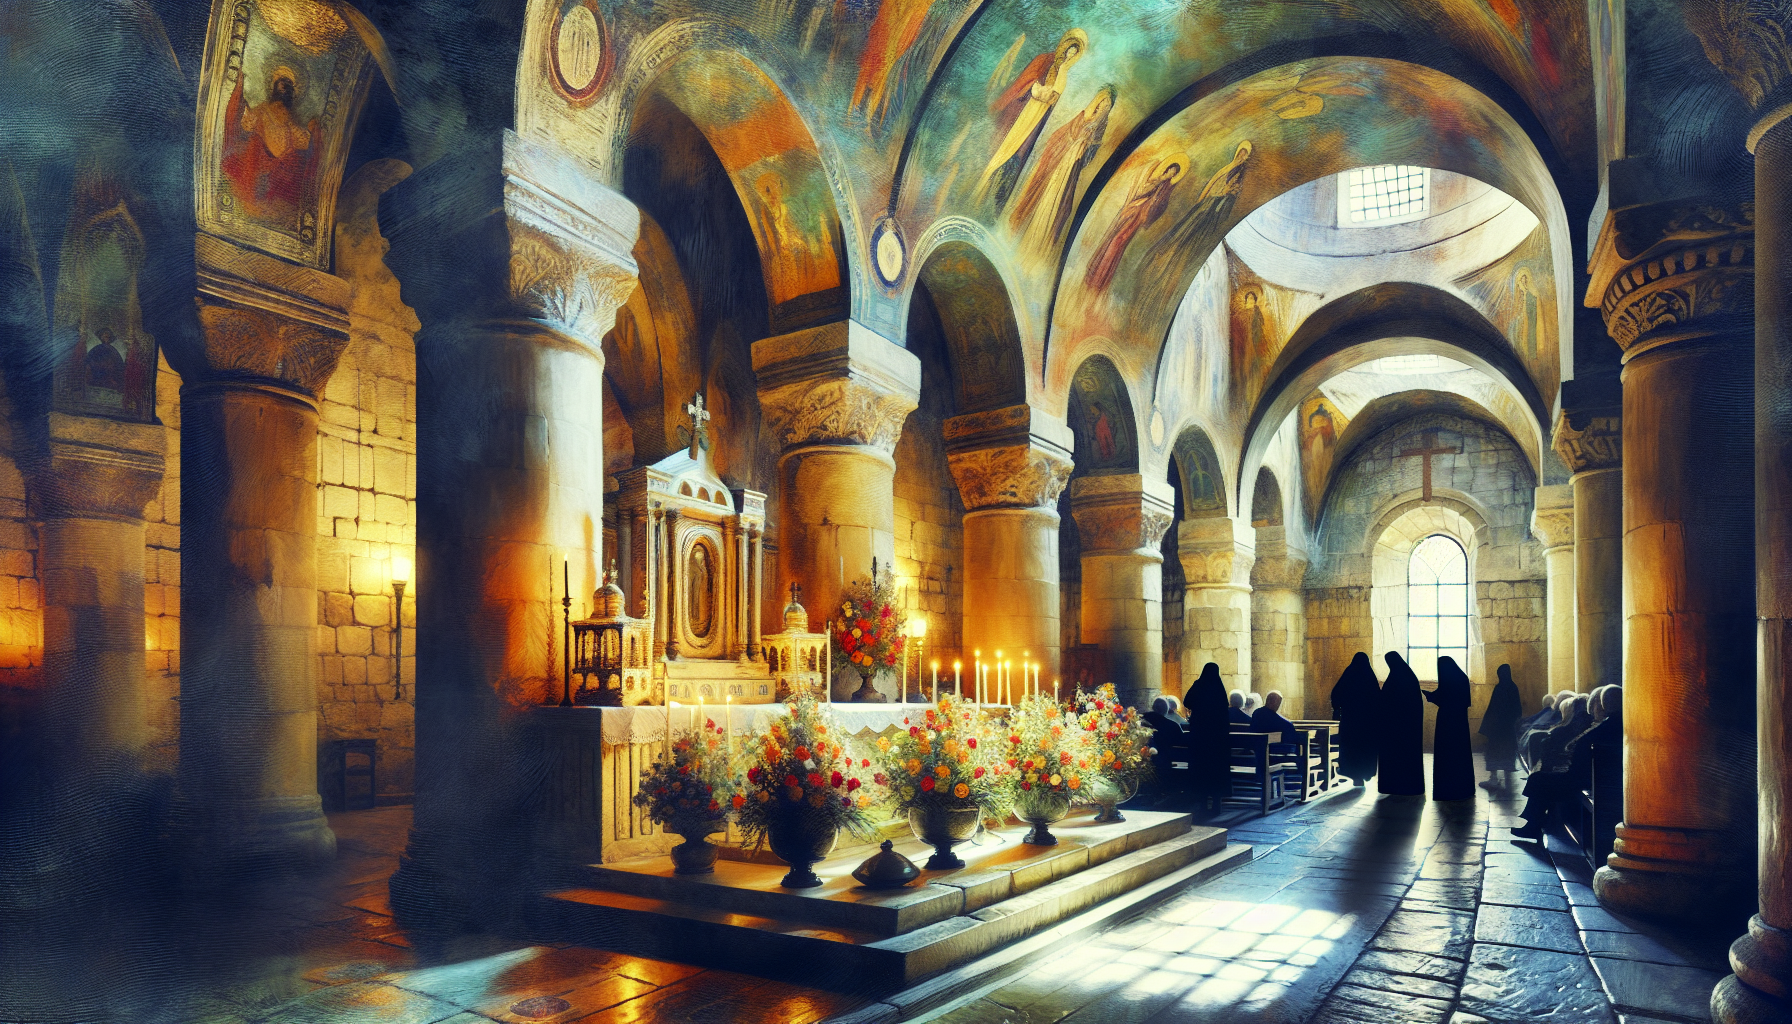 Serene, ethereal painting of a historic church interior with soft lighting, featuring ancient stone walls and religious artifacts prominently displaying the supposed location of the resting place of t